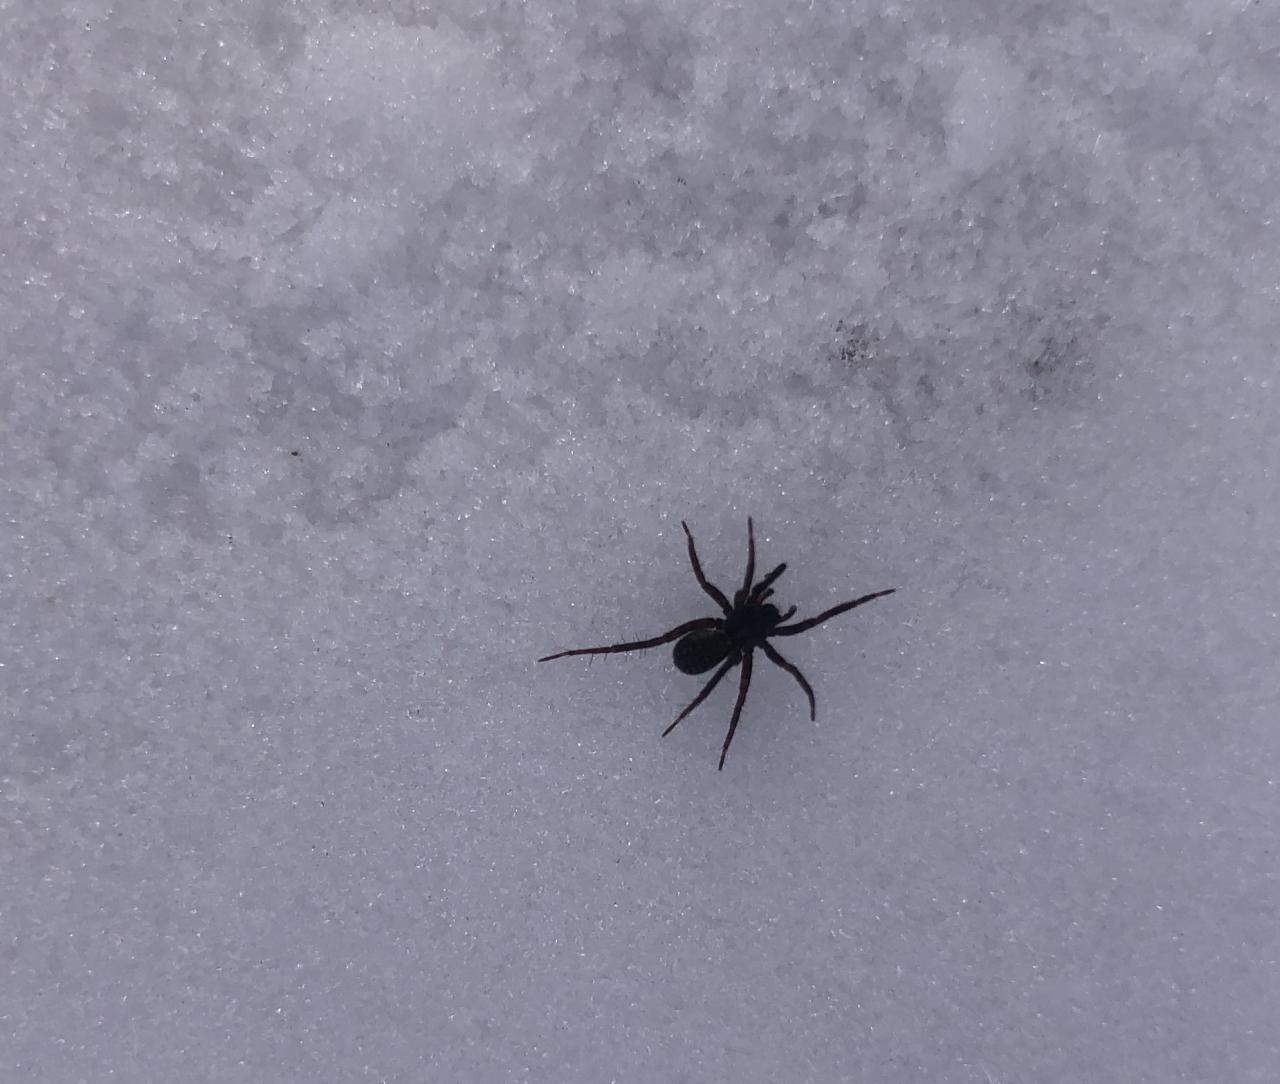 Common House Spiders You May Notice During Winter